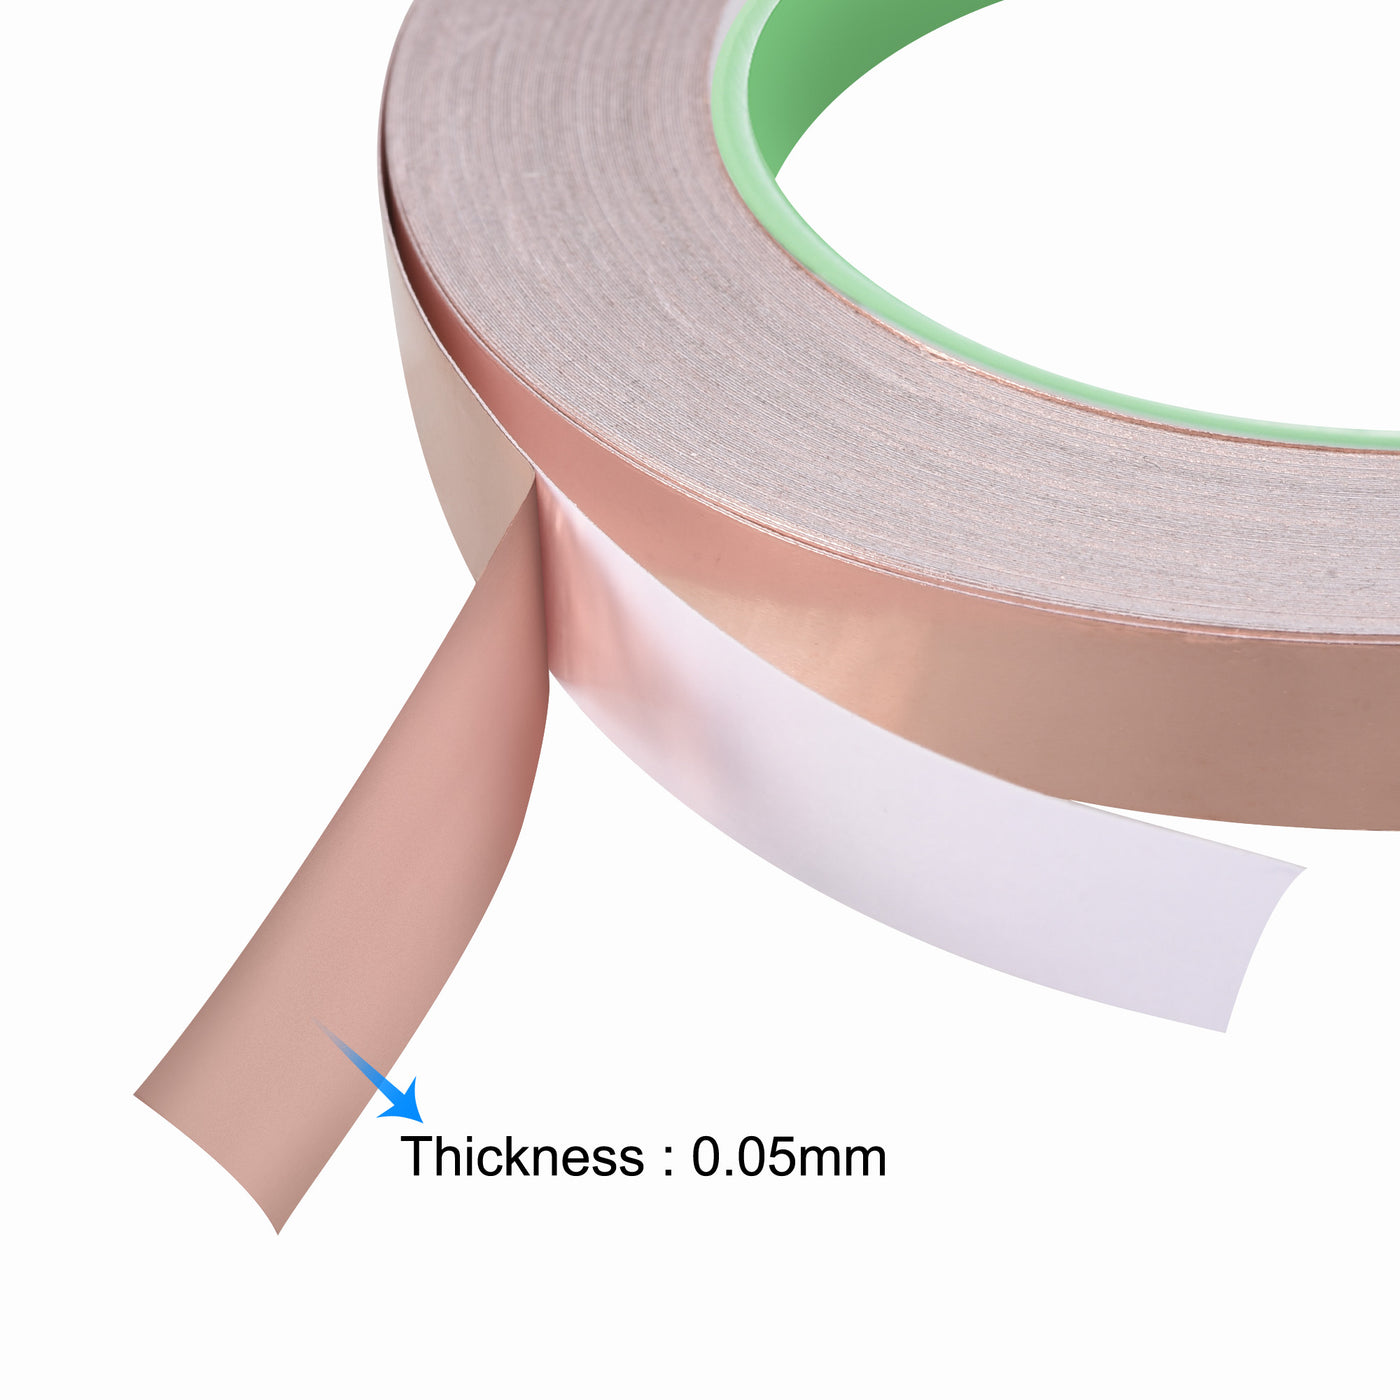 uxcell Uxcell Double-Sided Conductive Tape Copper Foil Tape 20mm x 30m/98.4ft 1pcs